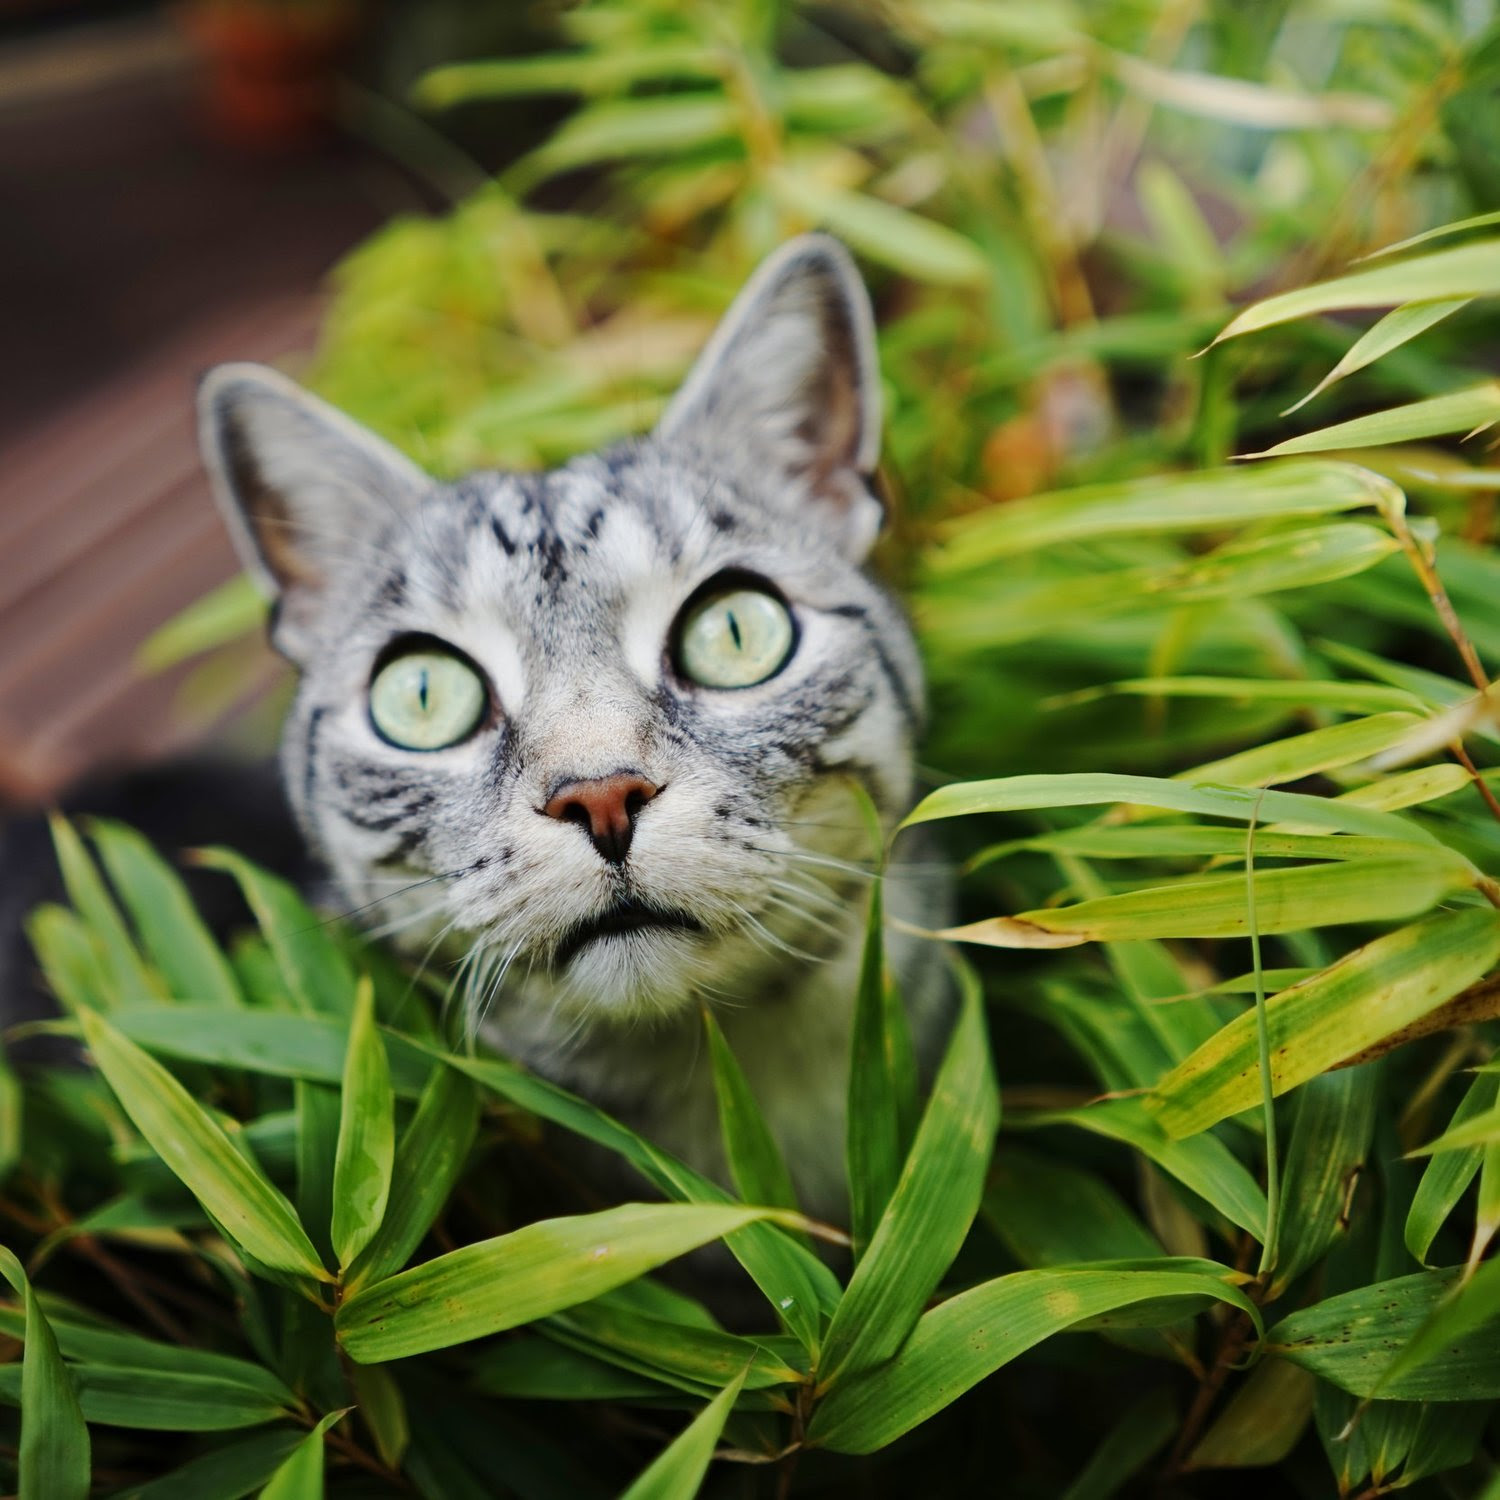 Bamboo Plants Poisonous To Cats